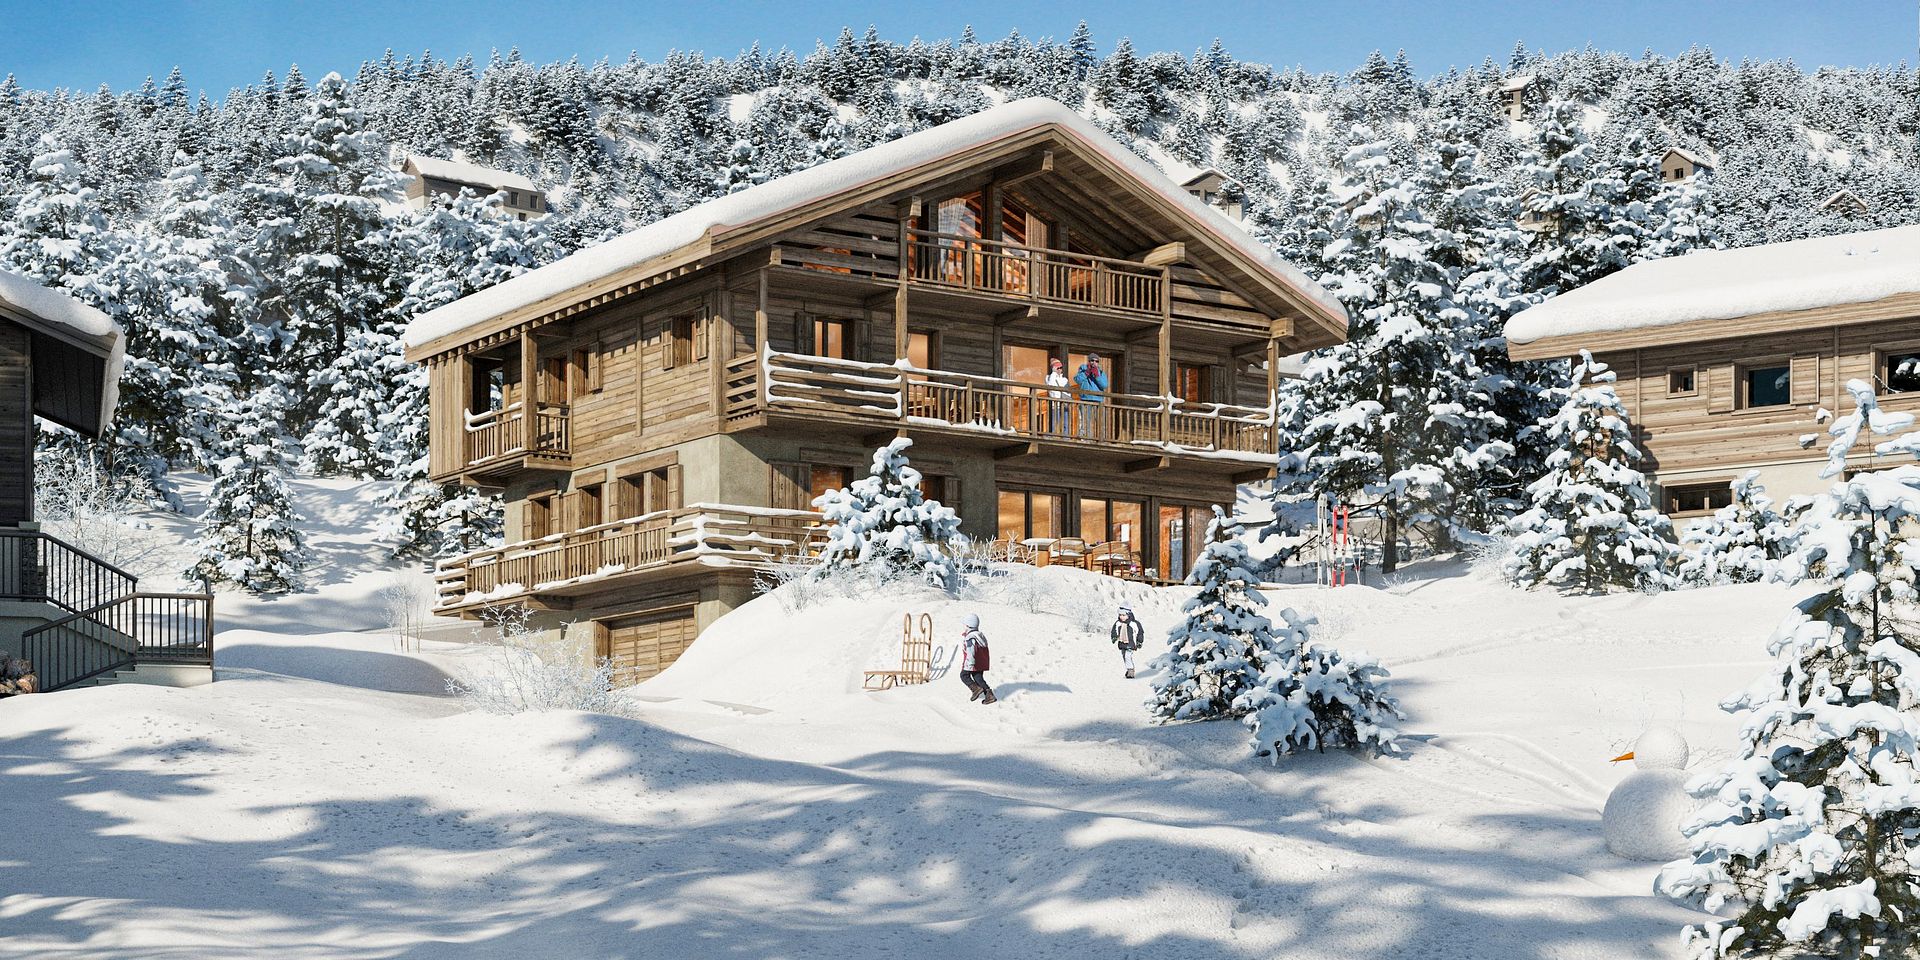 5 bed Chalet For Sale in Les Aravis, French Alps